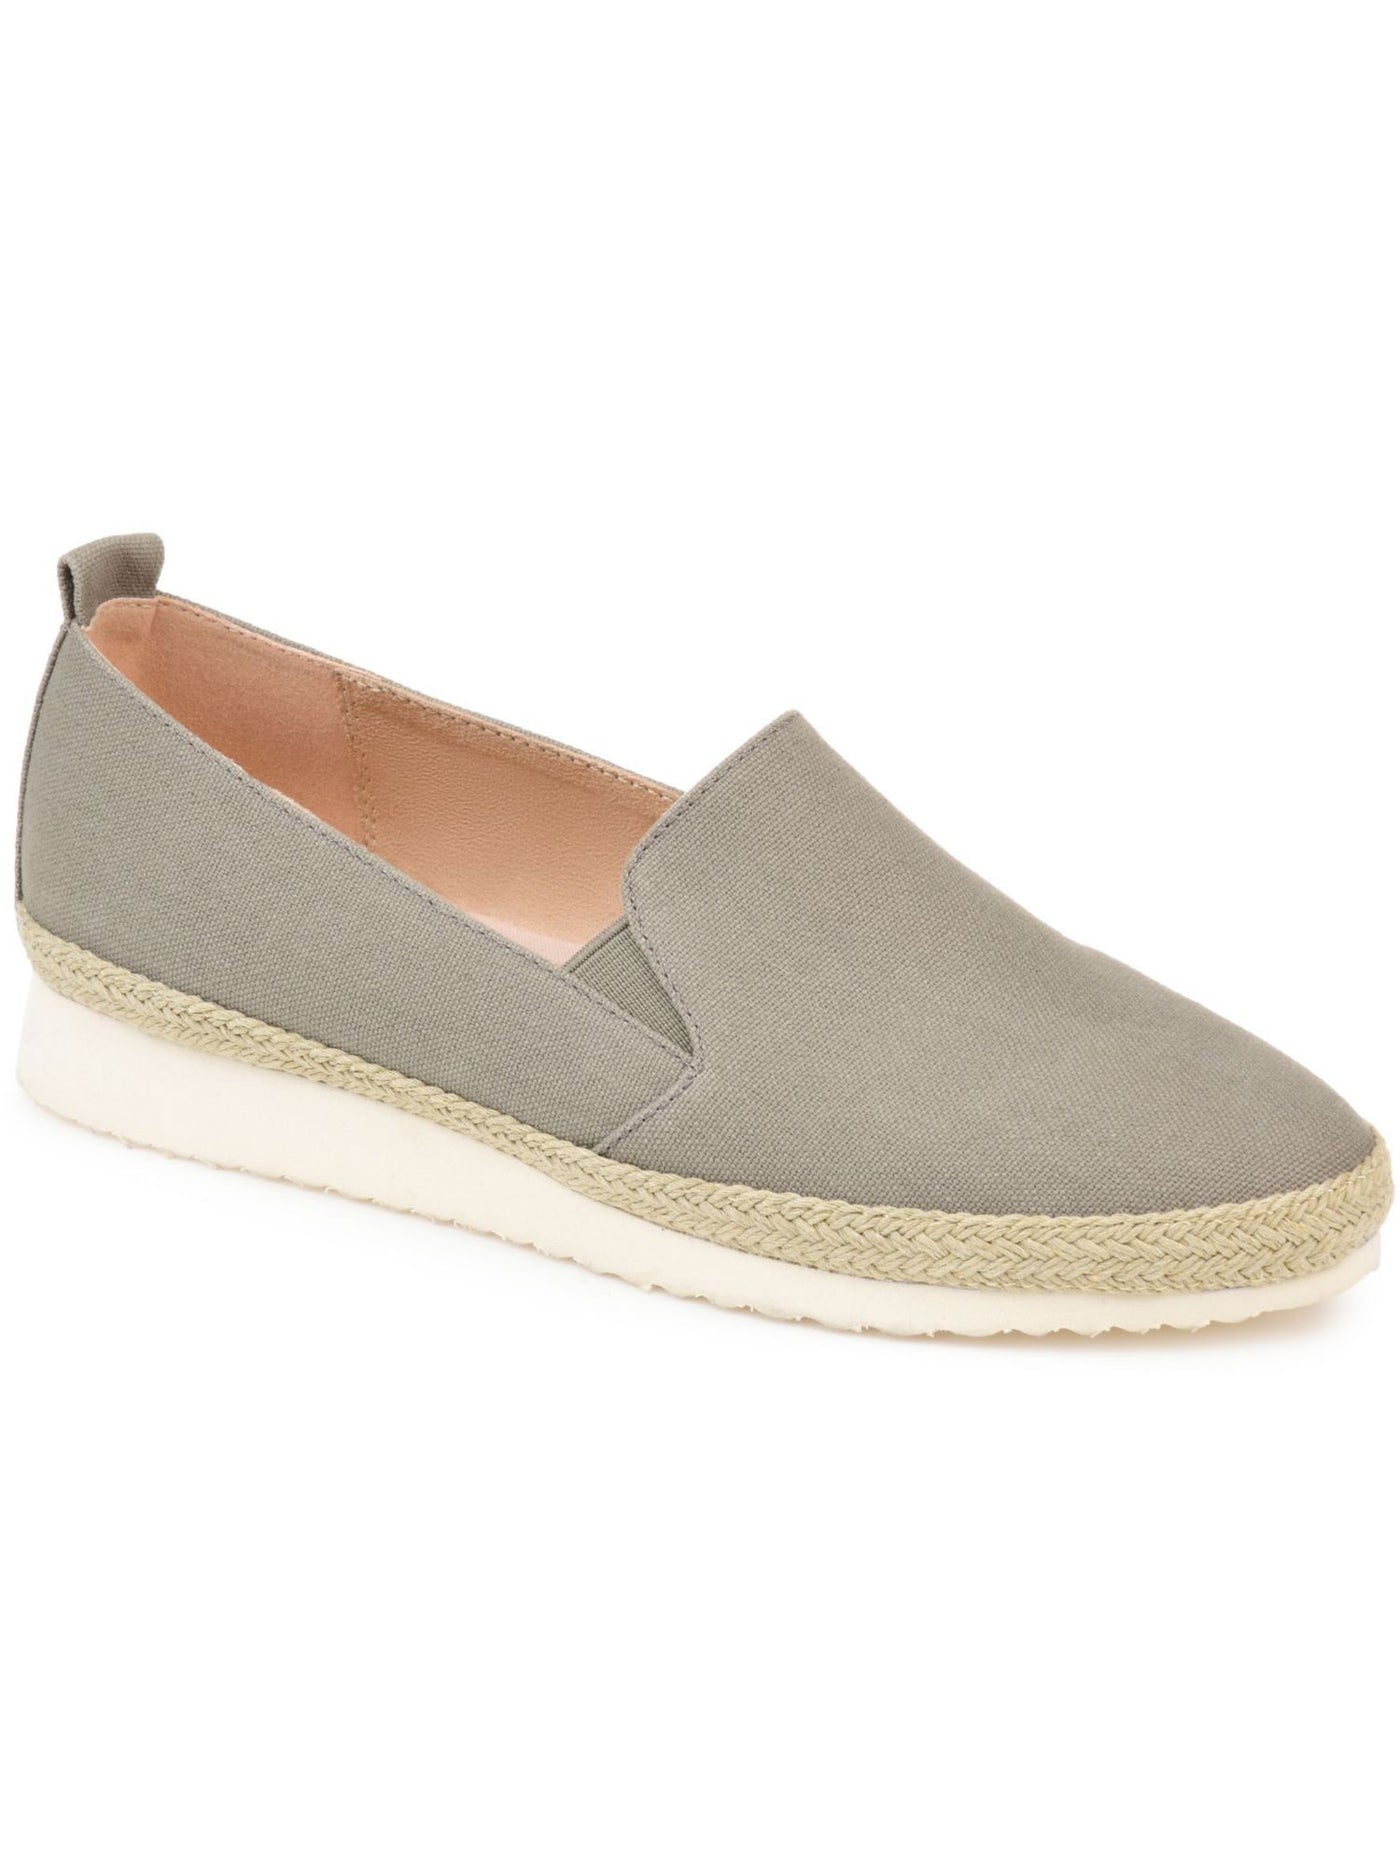 JOURNEE COLLECTION Womens Gray Cusioned Back Pull Tag Woven Stretch Leela Espadrille Round Toe Wedge Slip On Espadrille Shoes 8.5 M